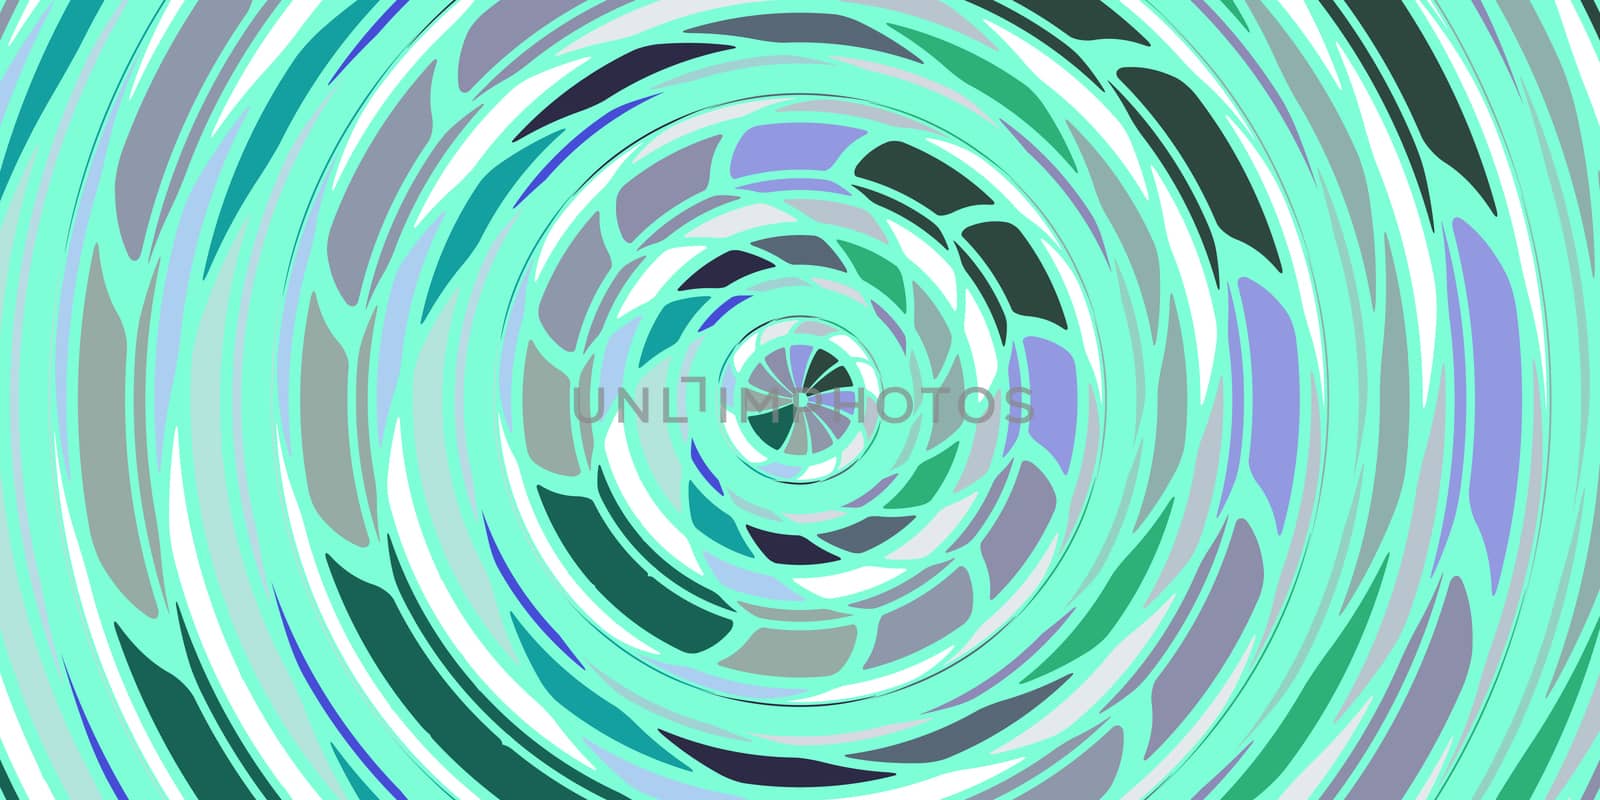 Sea Green Circles Art Action Background. Round Wheel Rhythm Backdrop. Center Concept. by sanches812